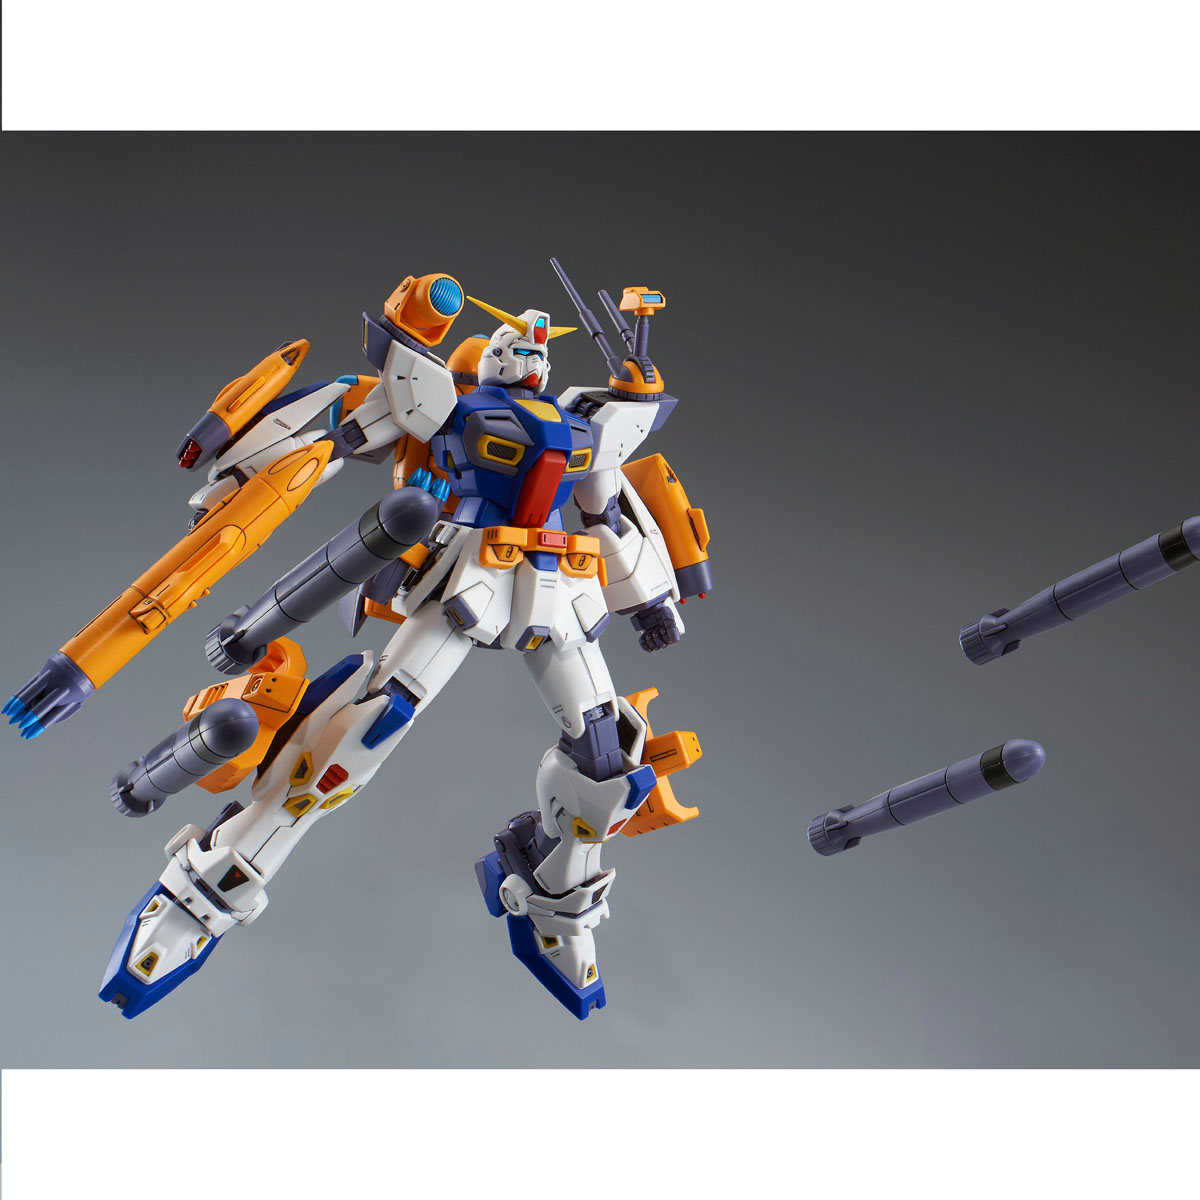 Mg 1 100 Mission Pack F Type M Type For Gundam F90 Gundam Premium Bandai Singapore Online Store For Action Figures Model Kits Toys And More